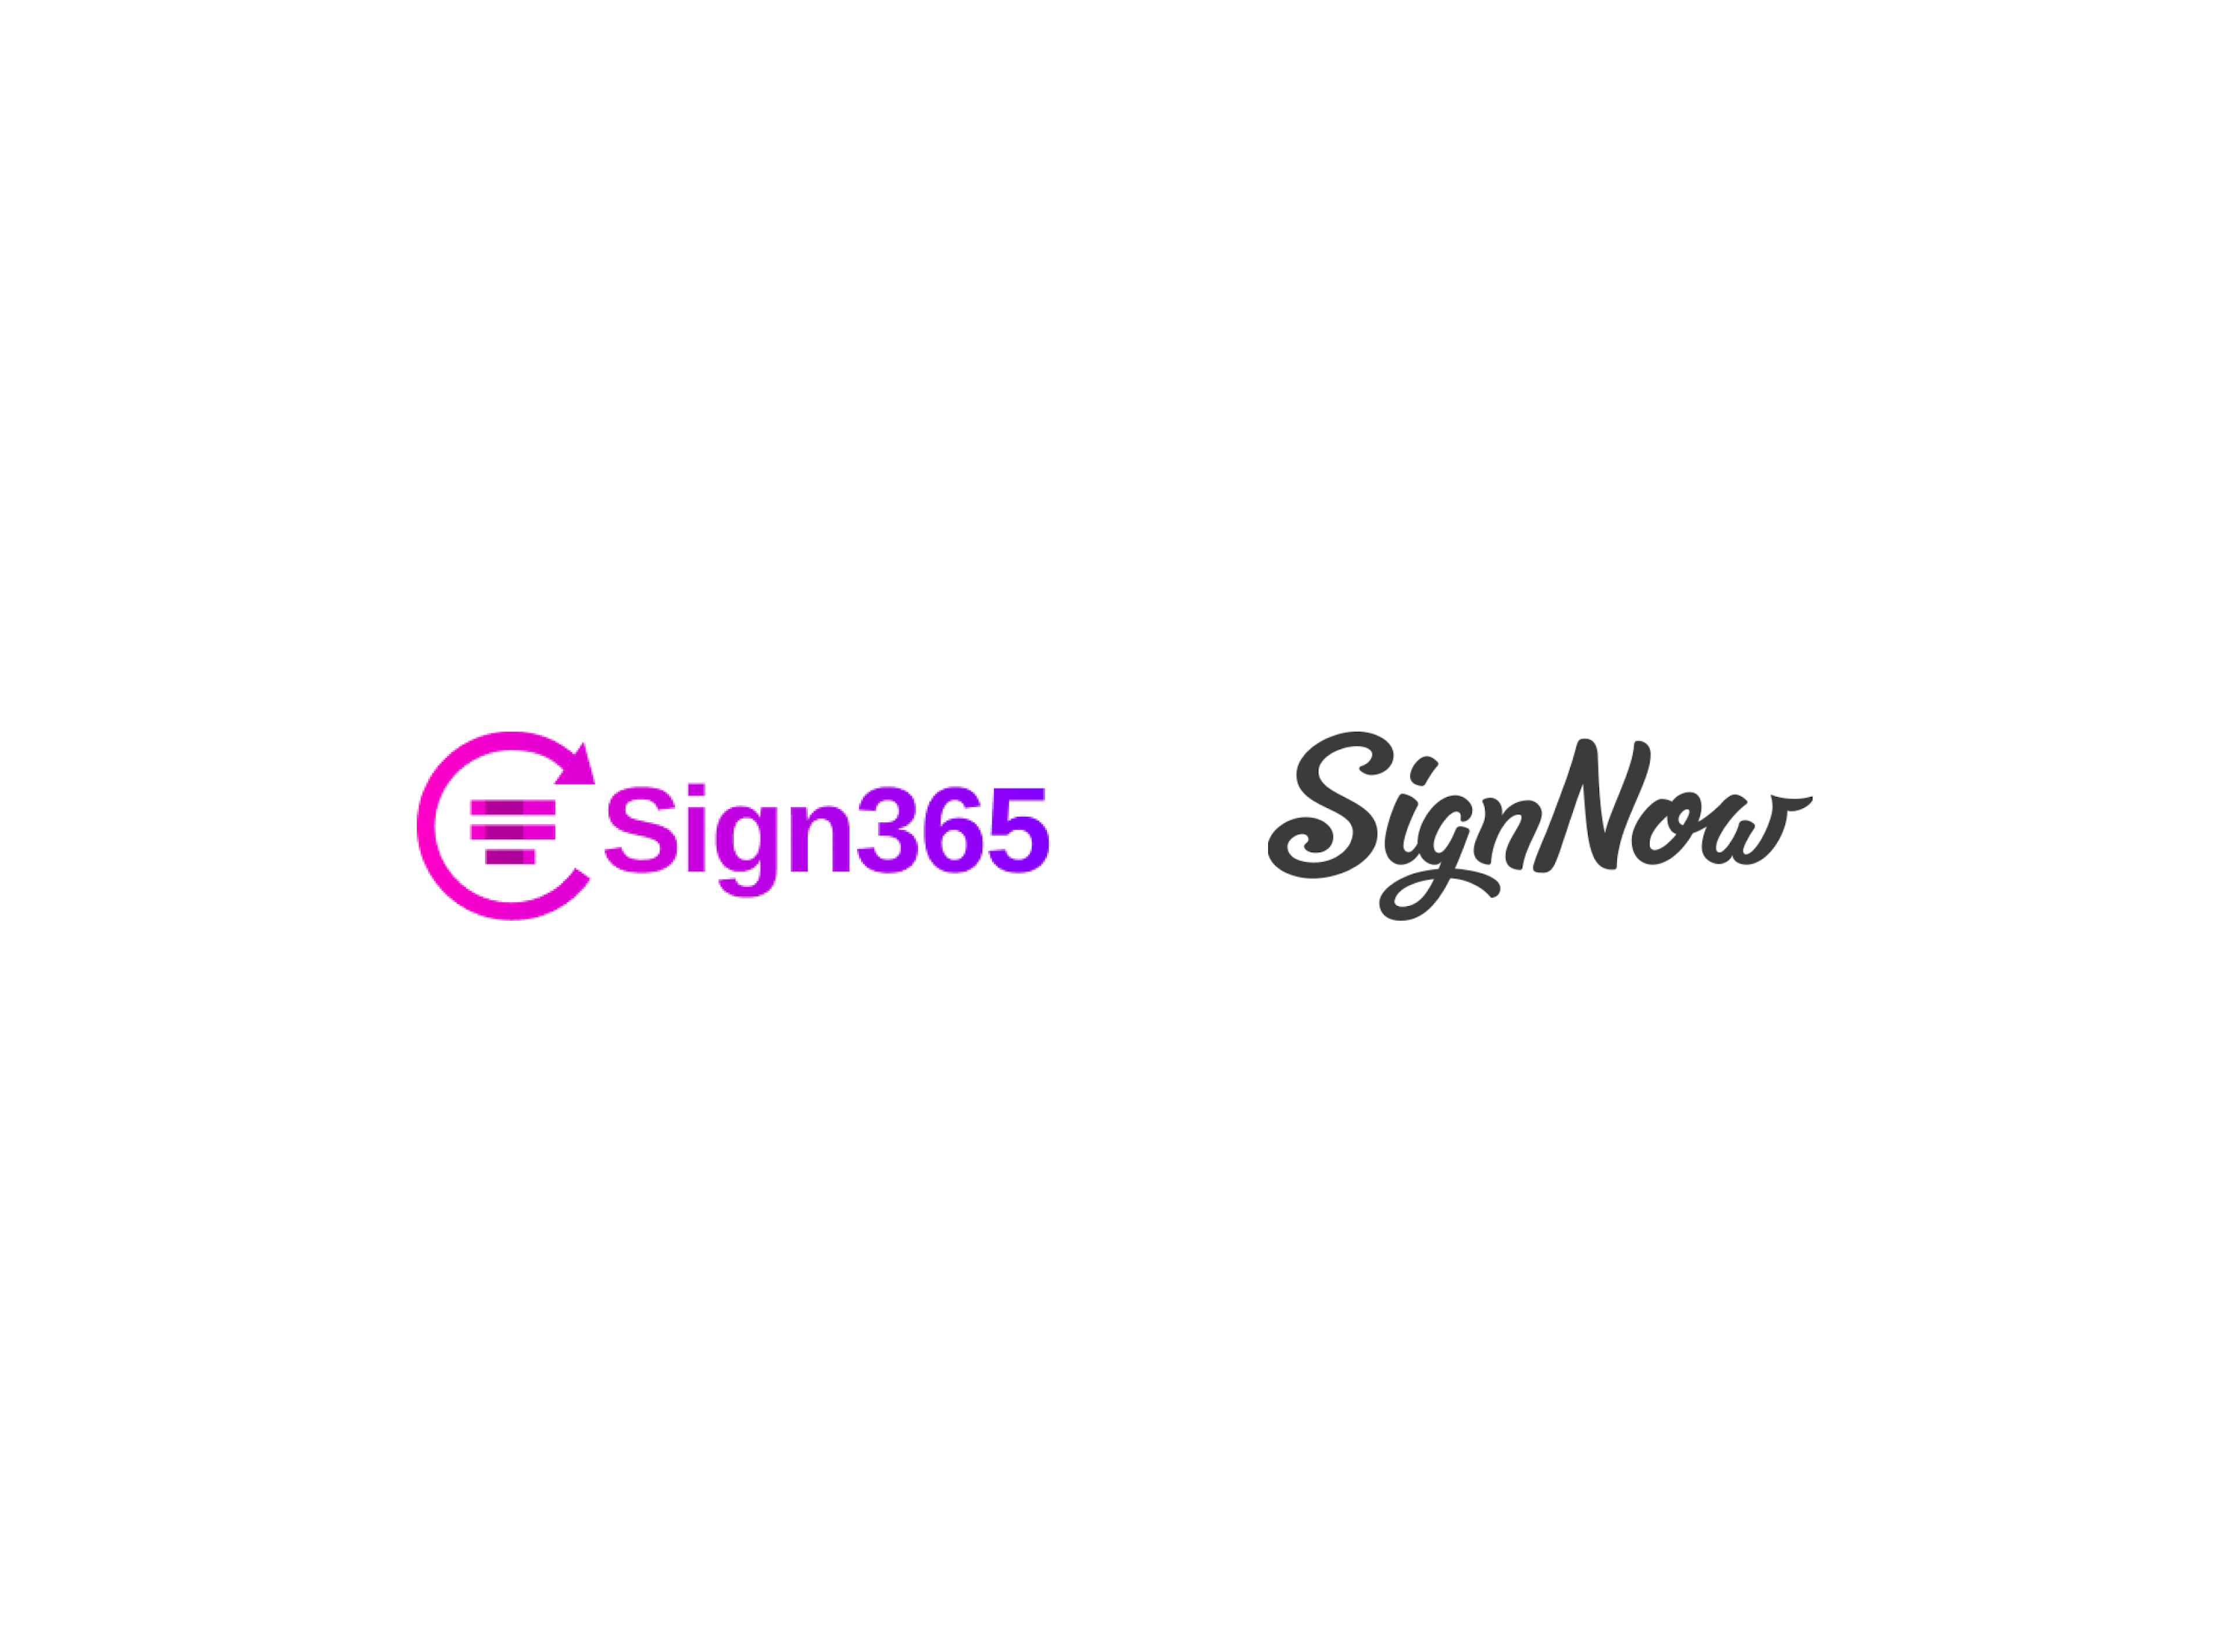 Sign365 vs signNow